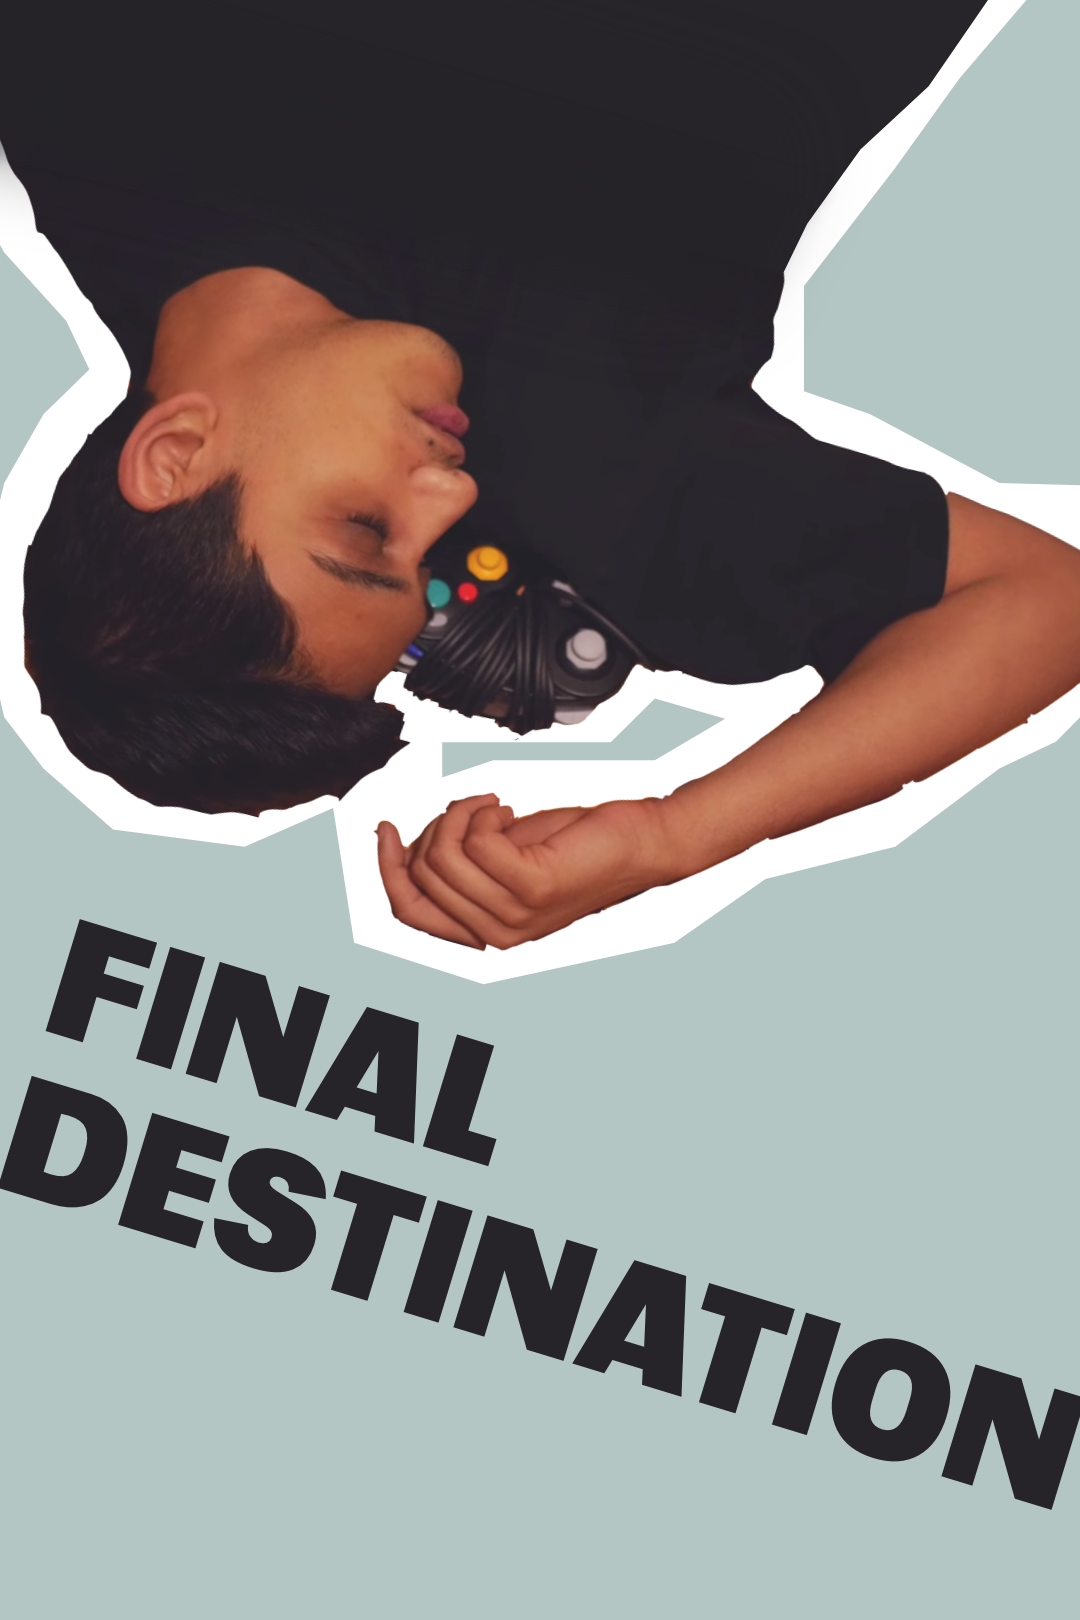 Poster for the film "Final Destination"